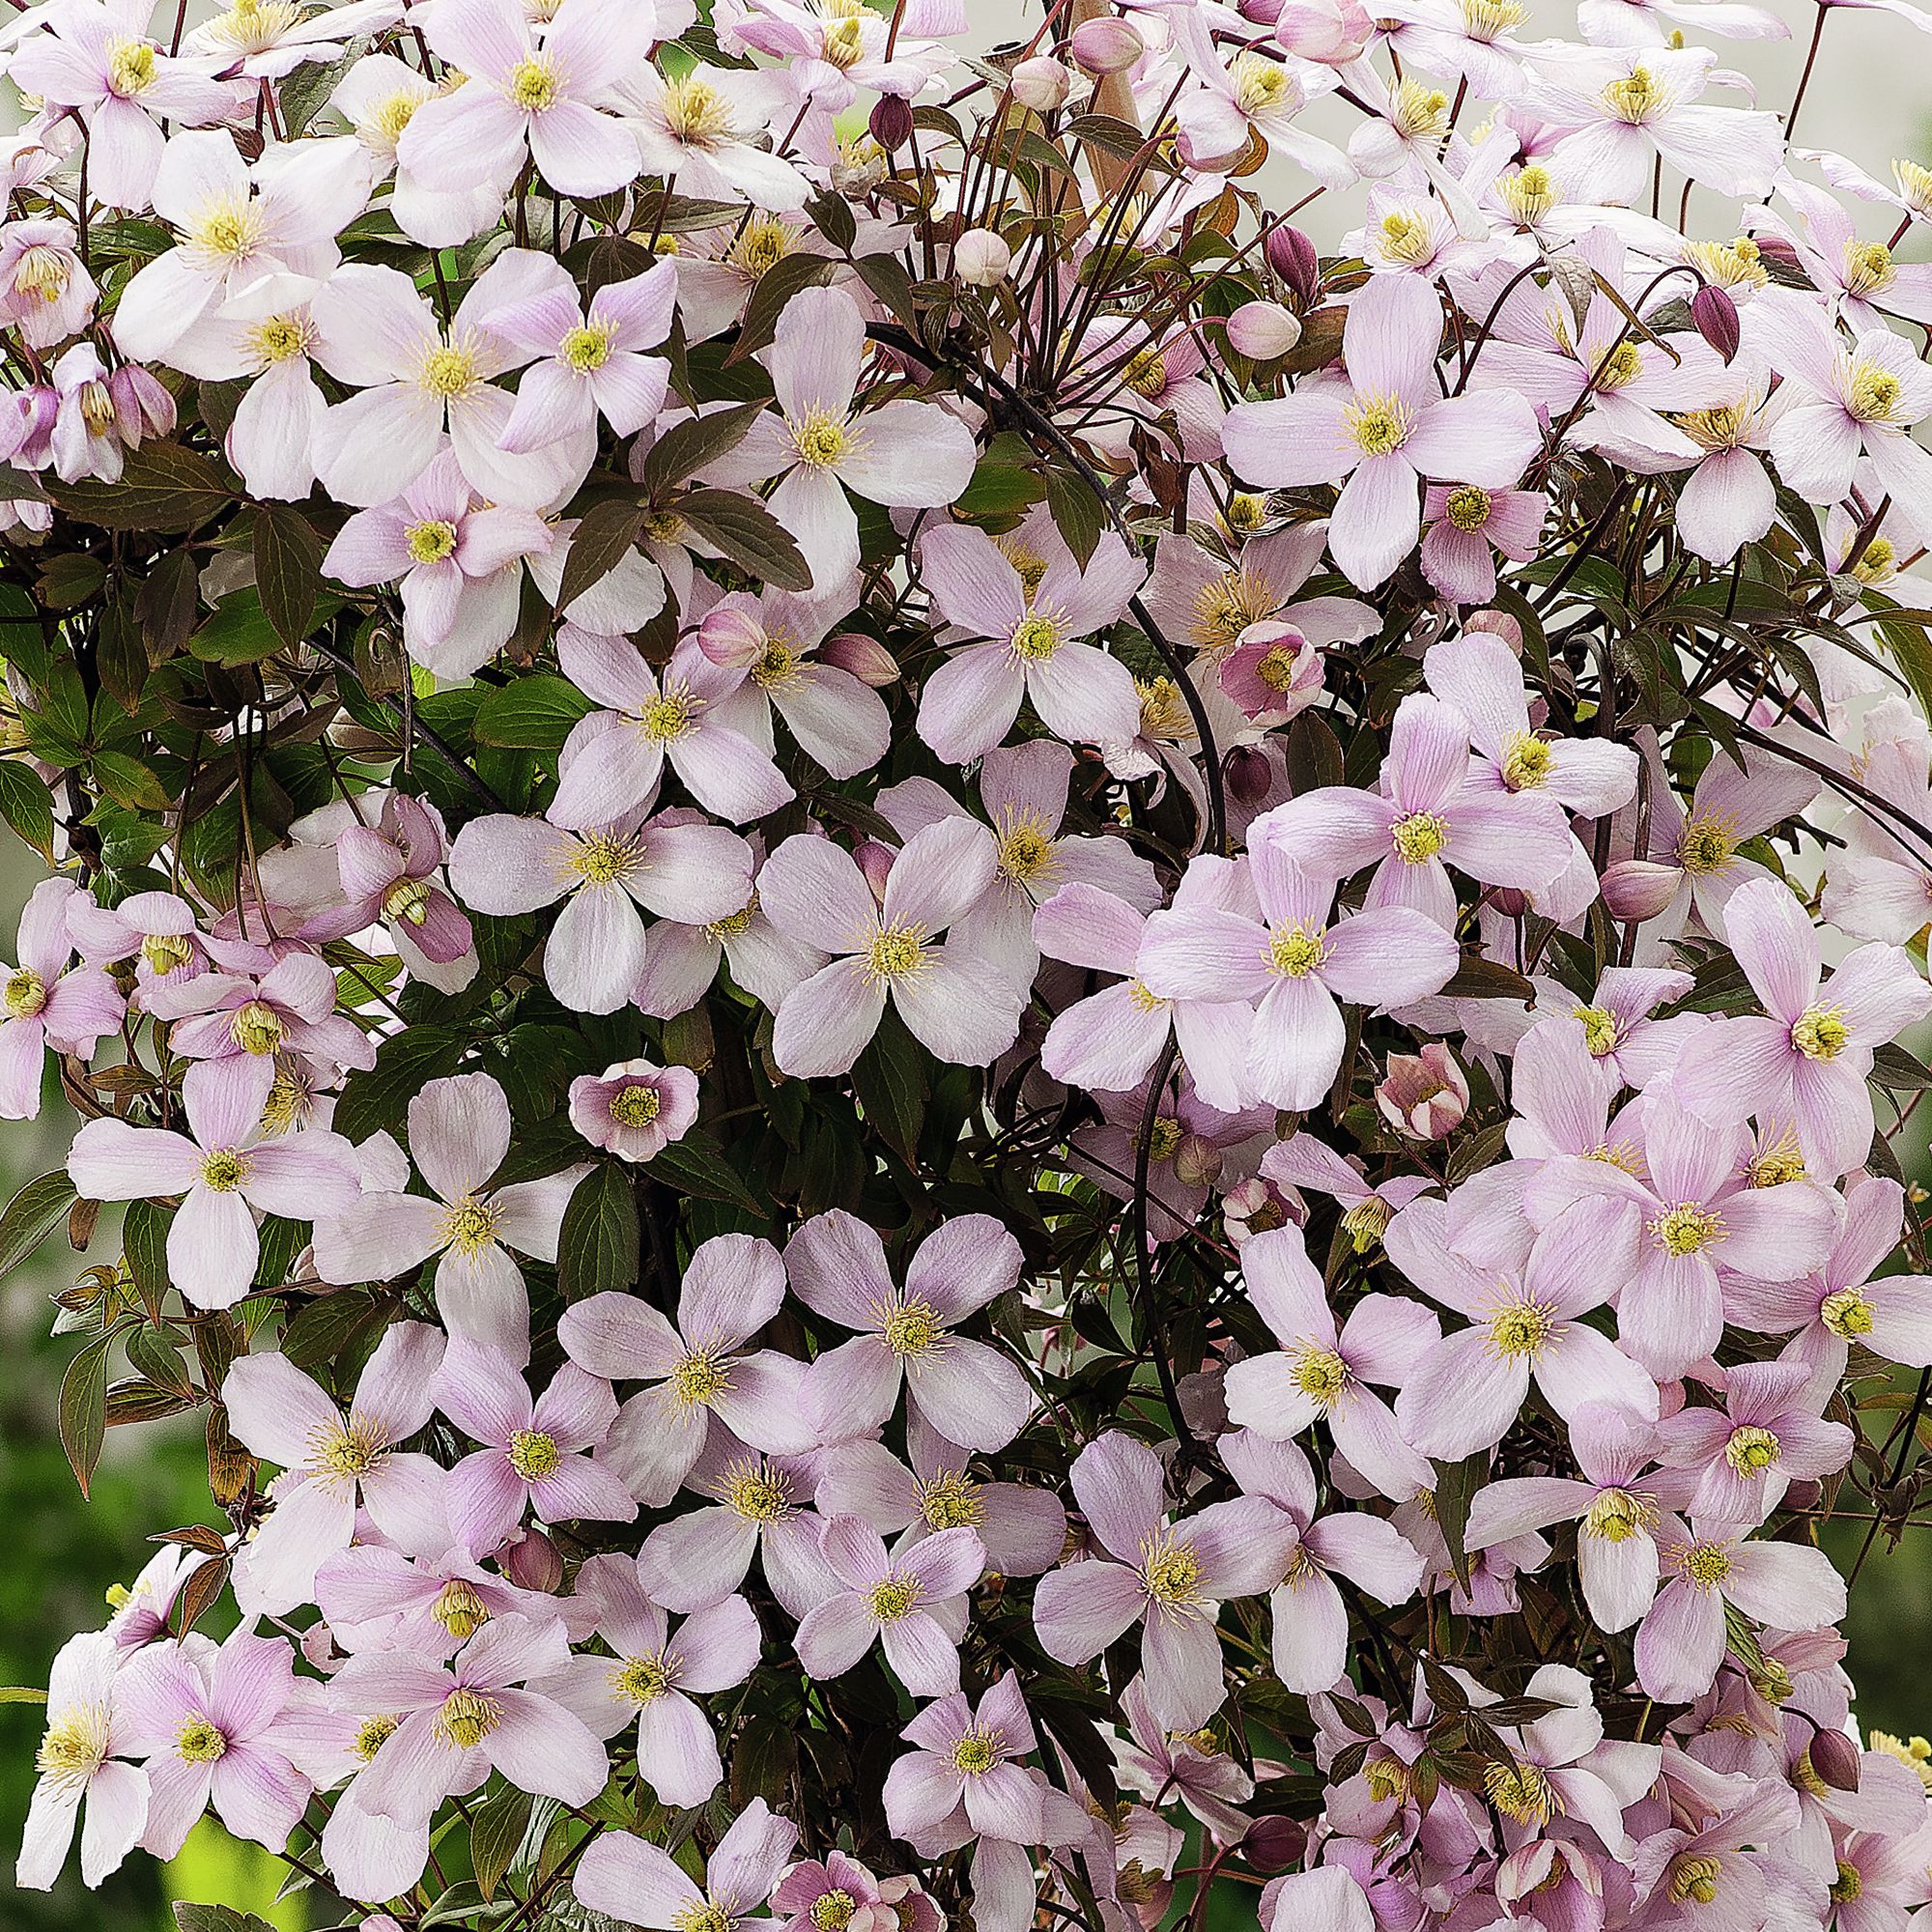 Verve Hardy Clematis Climbing plant